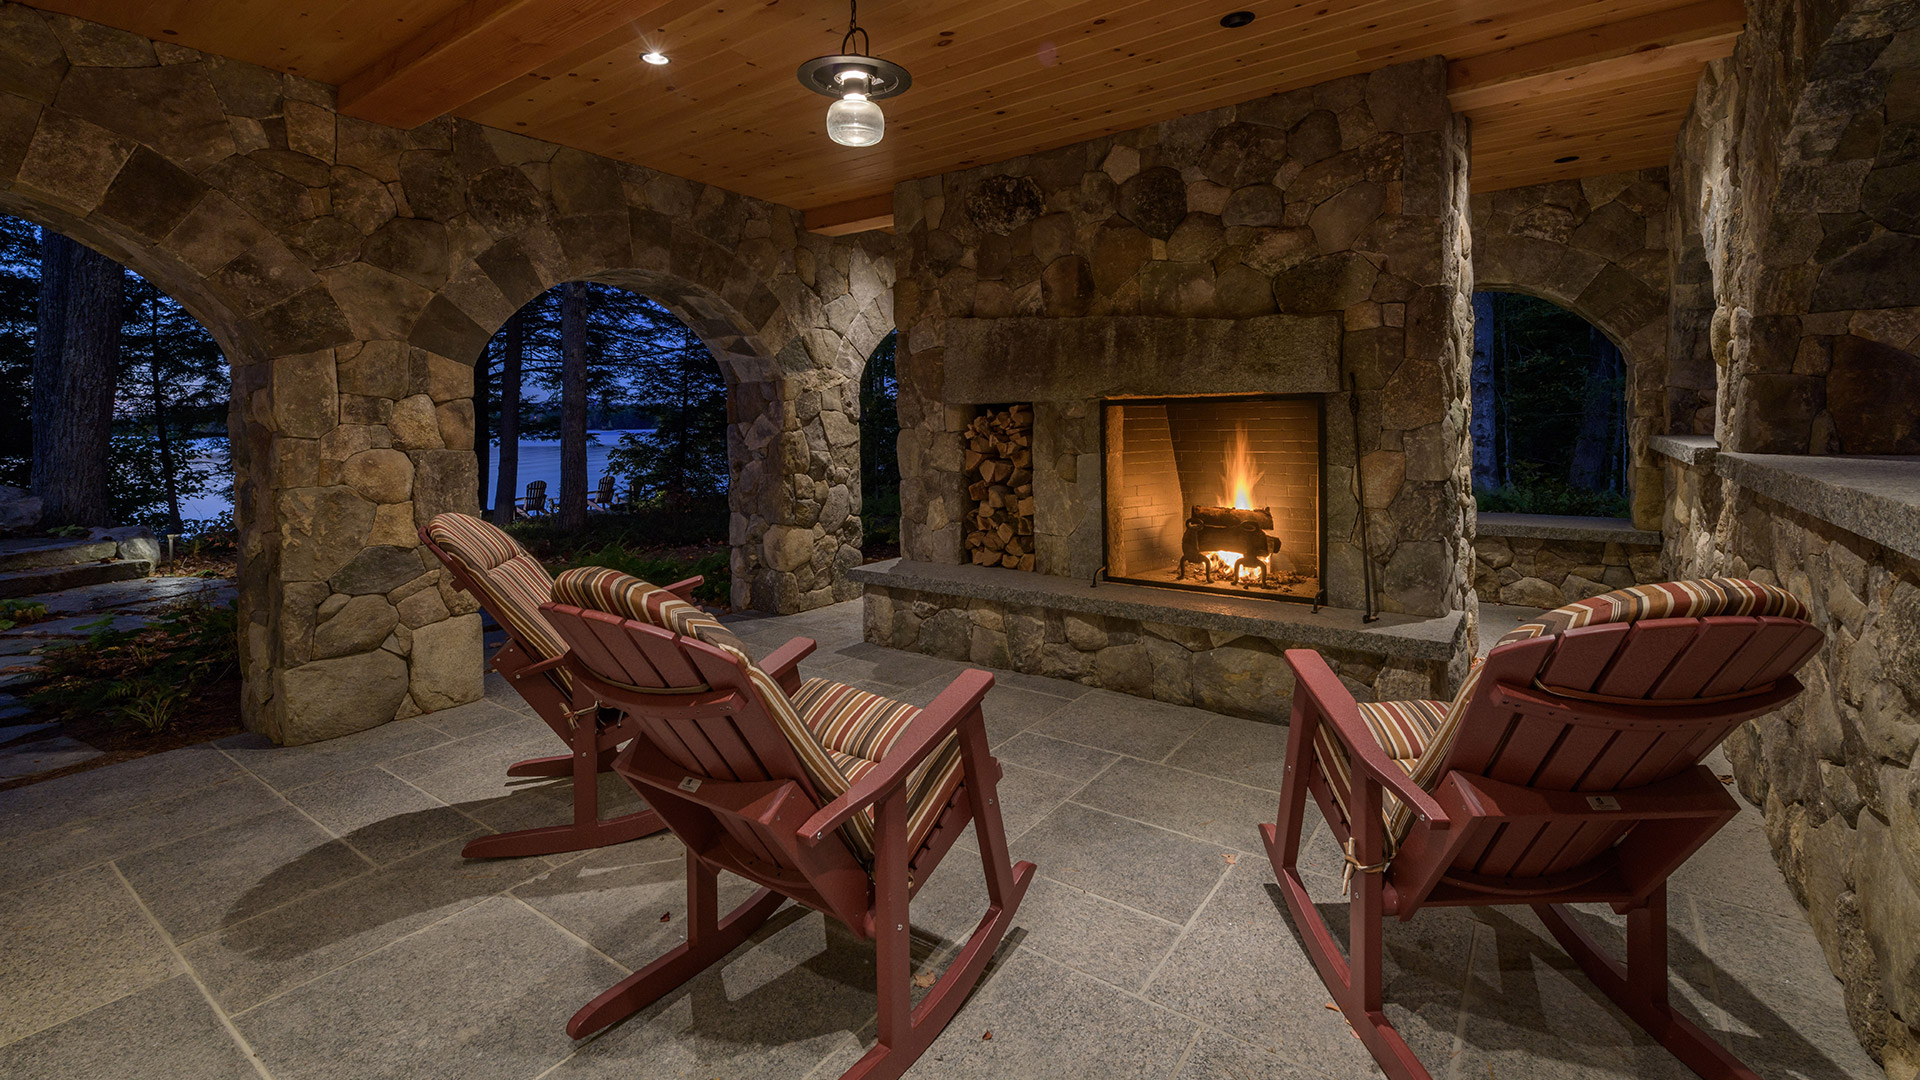 Alton, New Hampshire stone grotto with stone fireplace